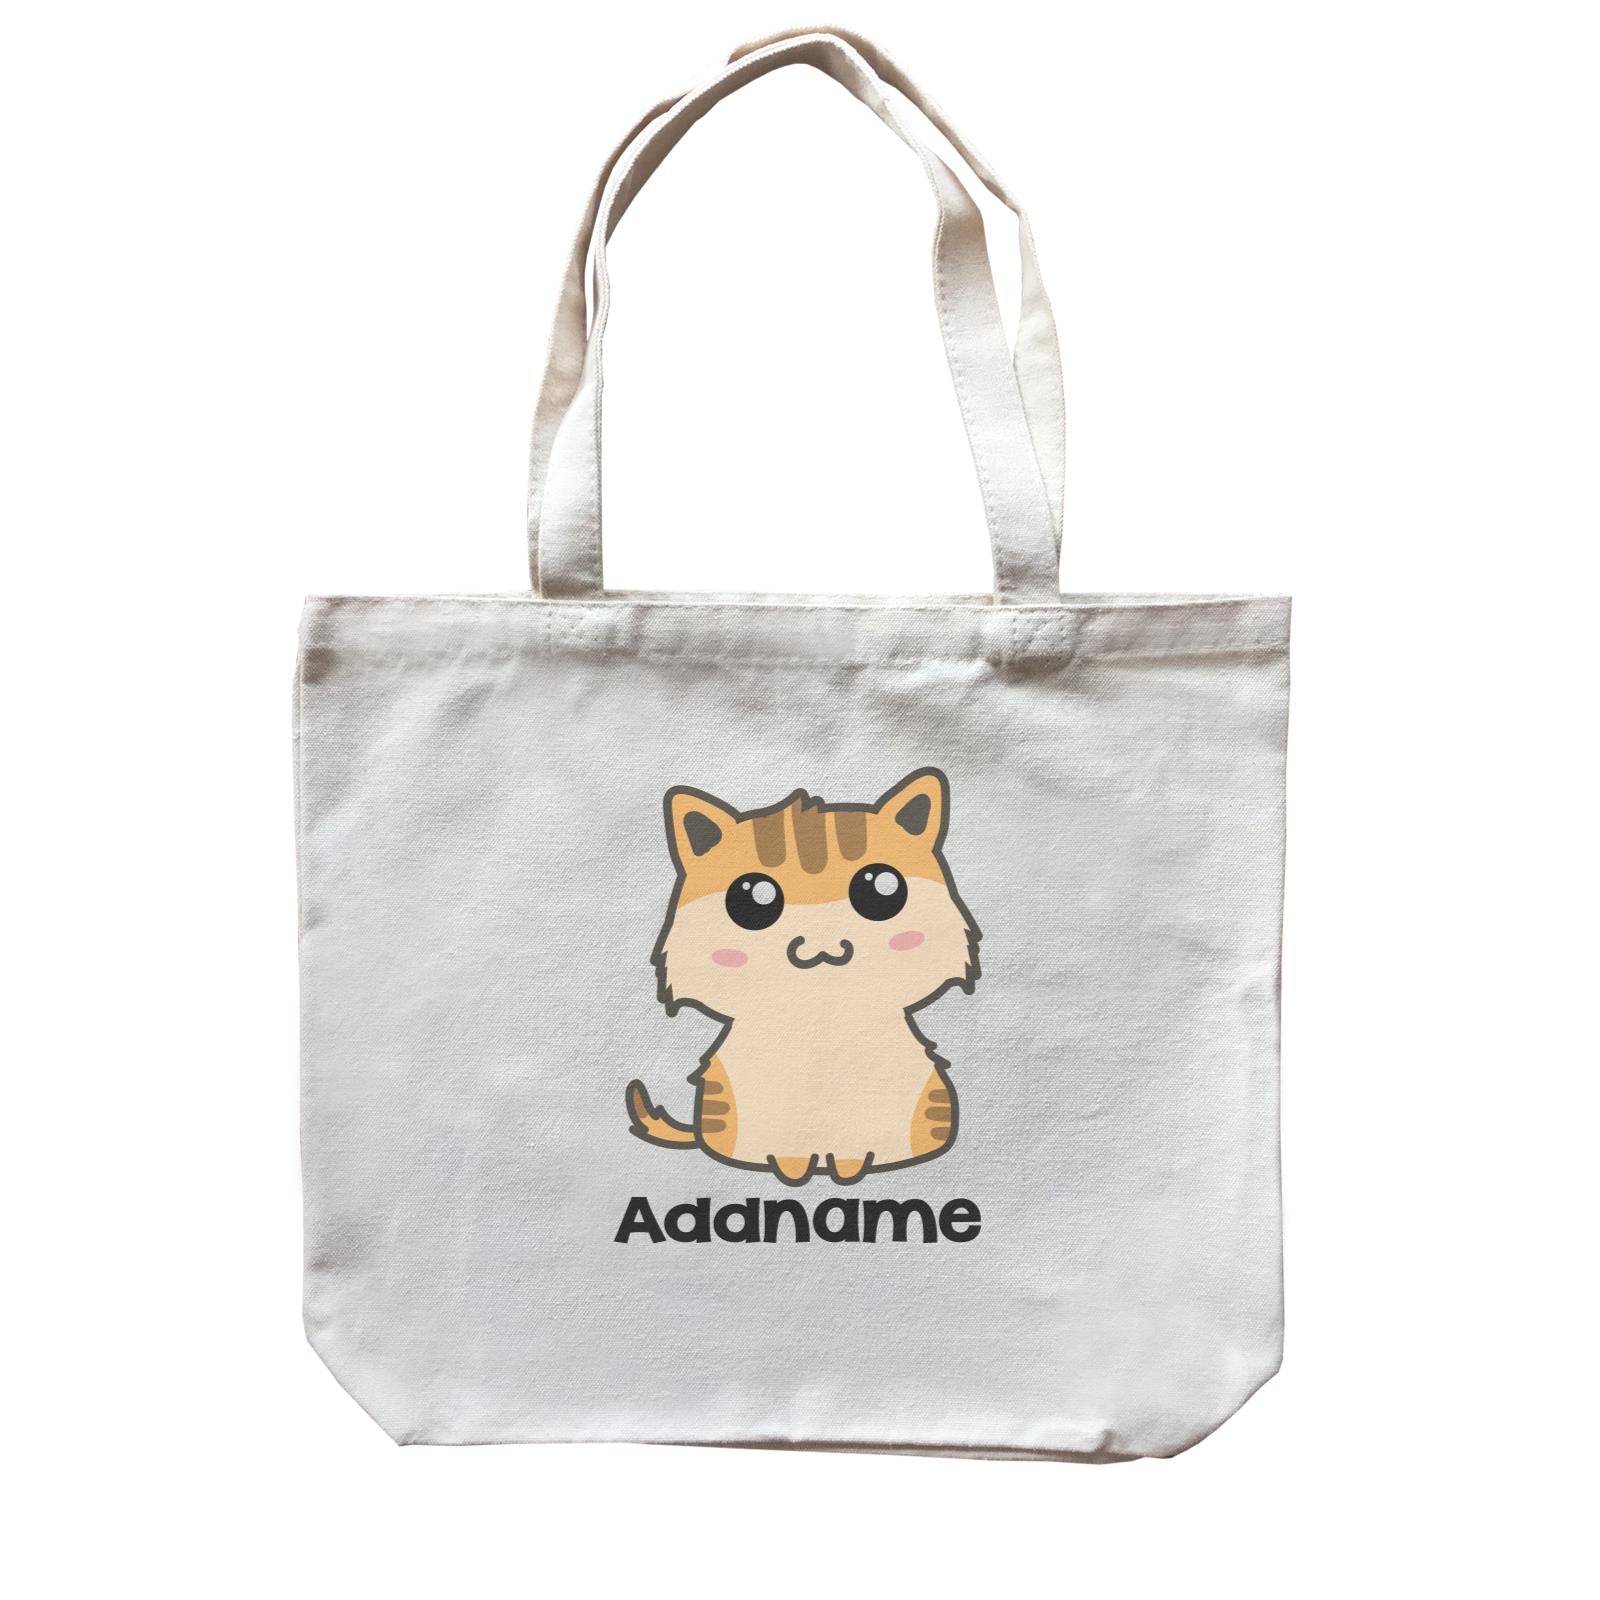 Drawn Adorable Cats Cream & Yellow Addname Canvas Bag